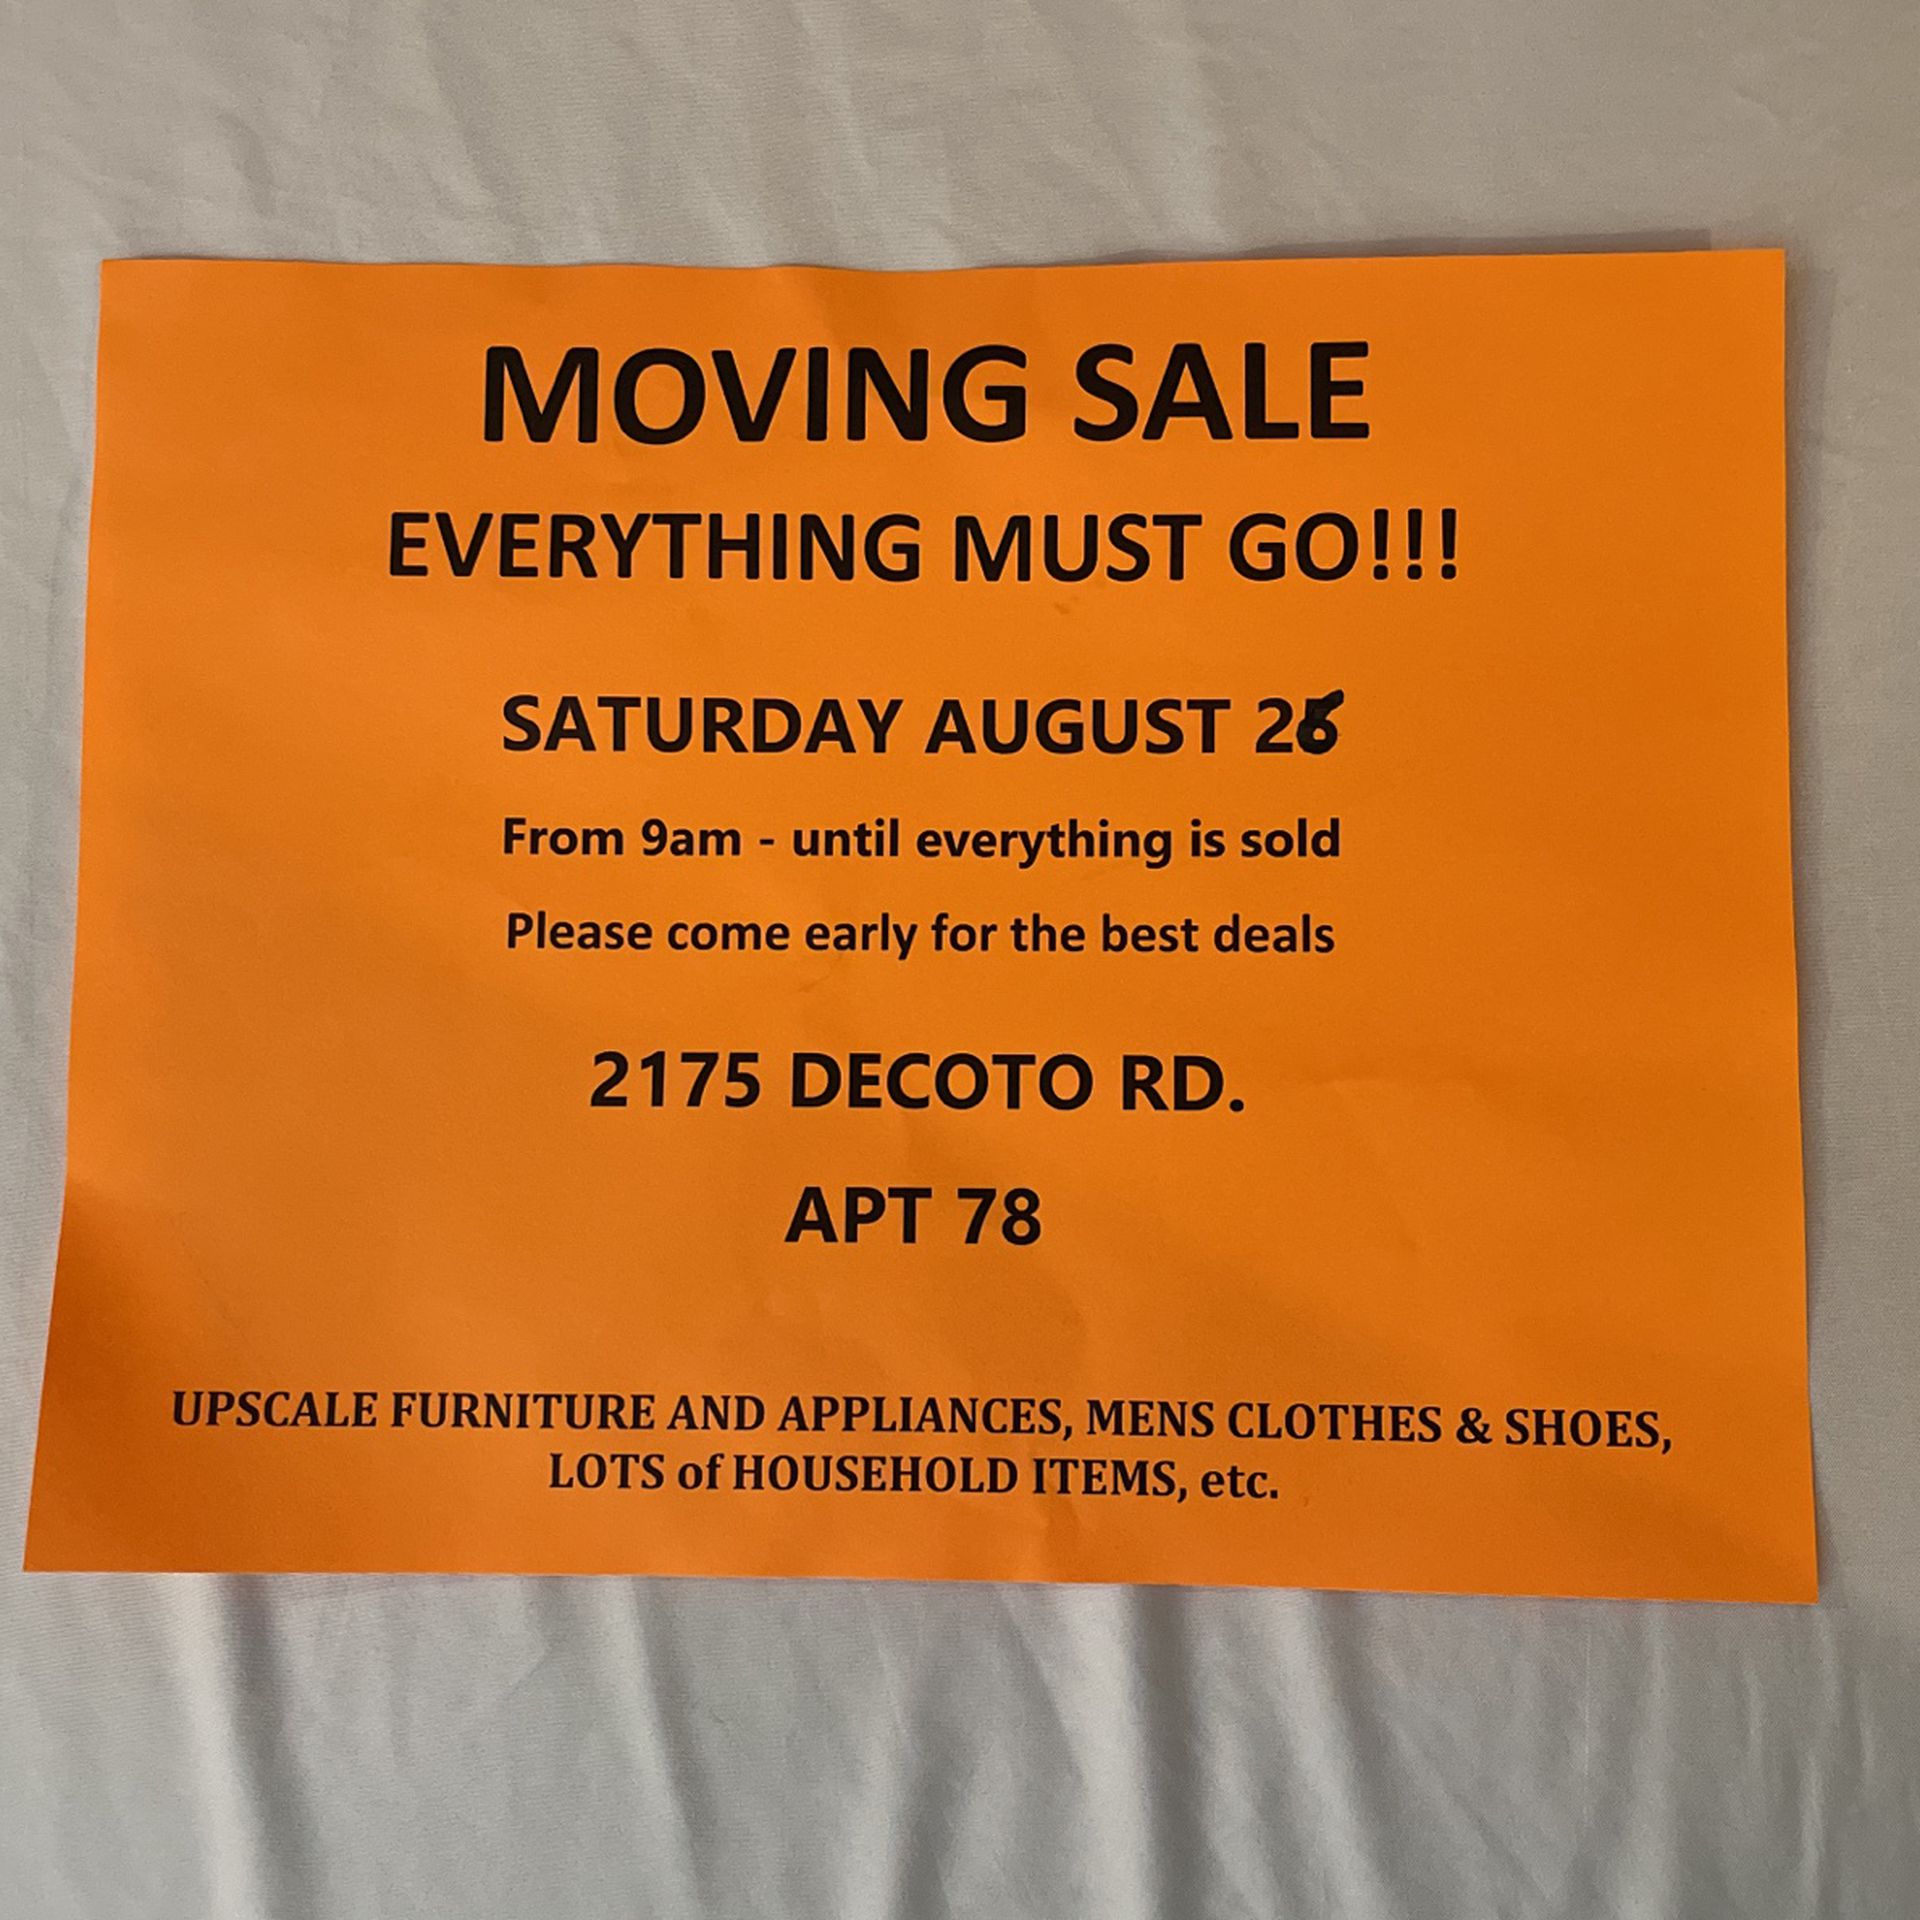 Transferred Overseas - Everything Must Go - Saturday August 26 At 9:00am